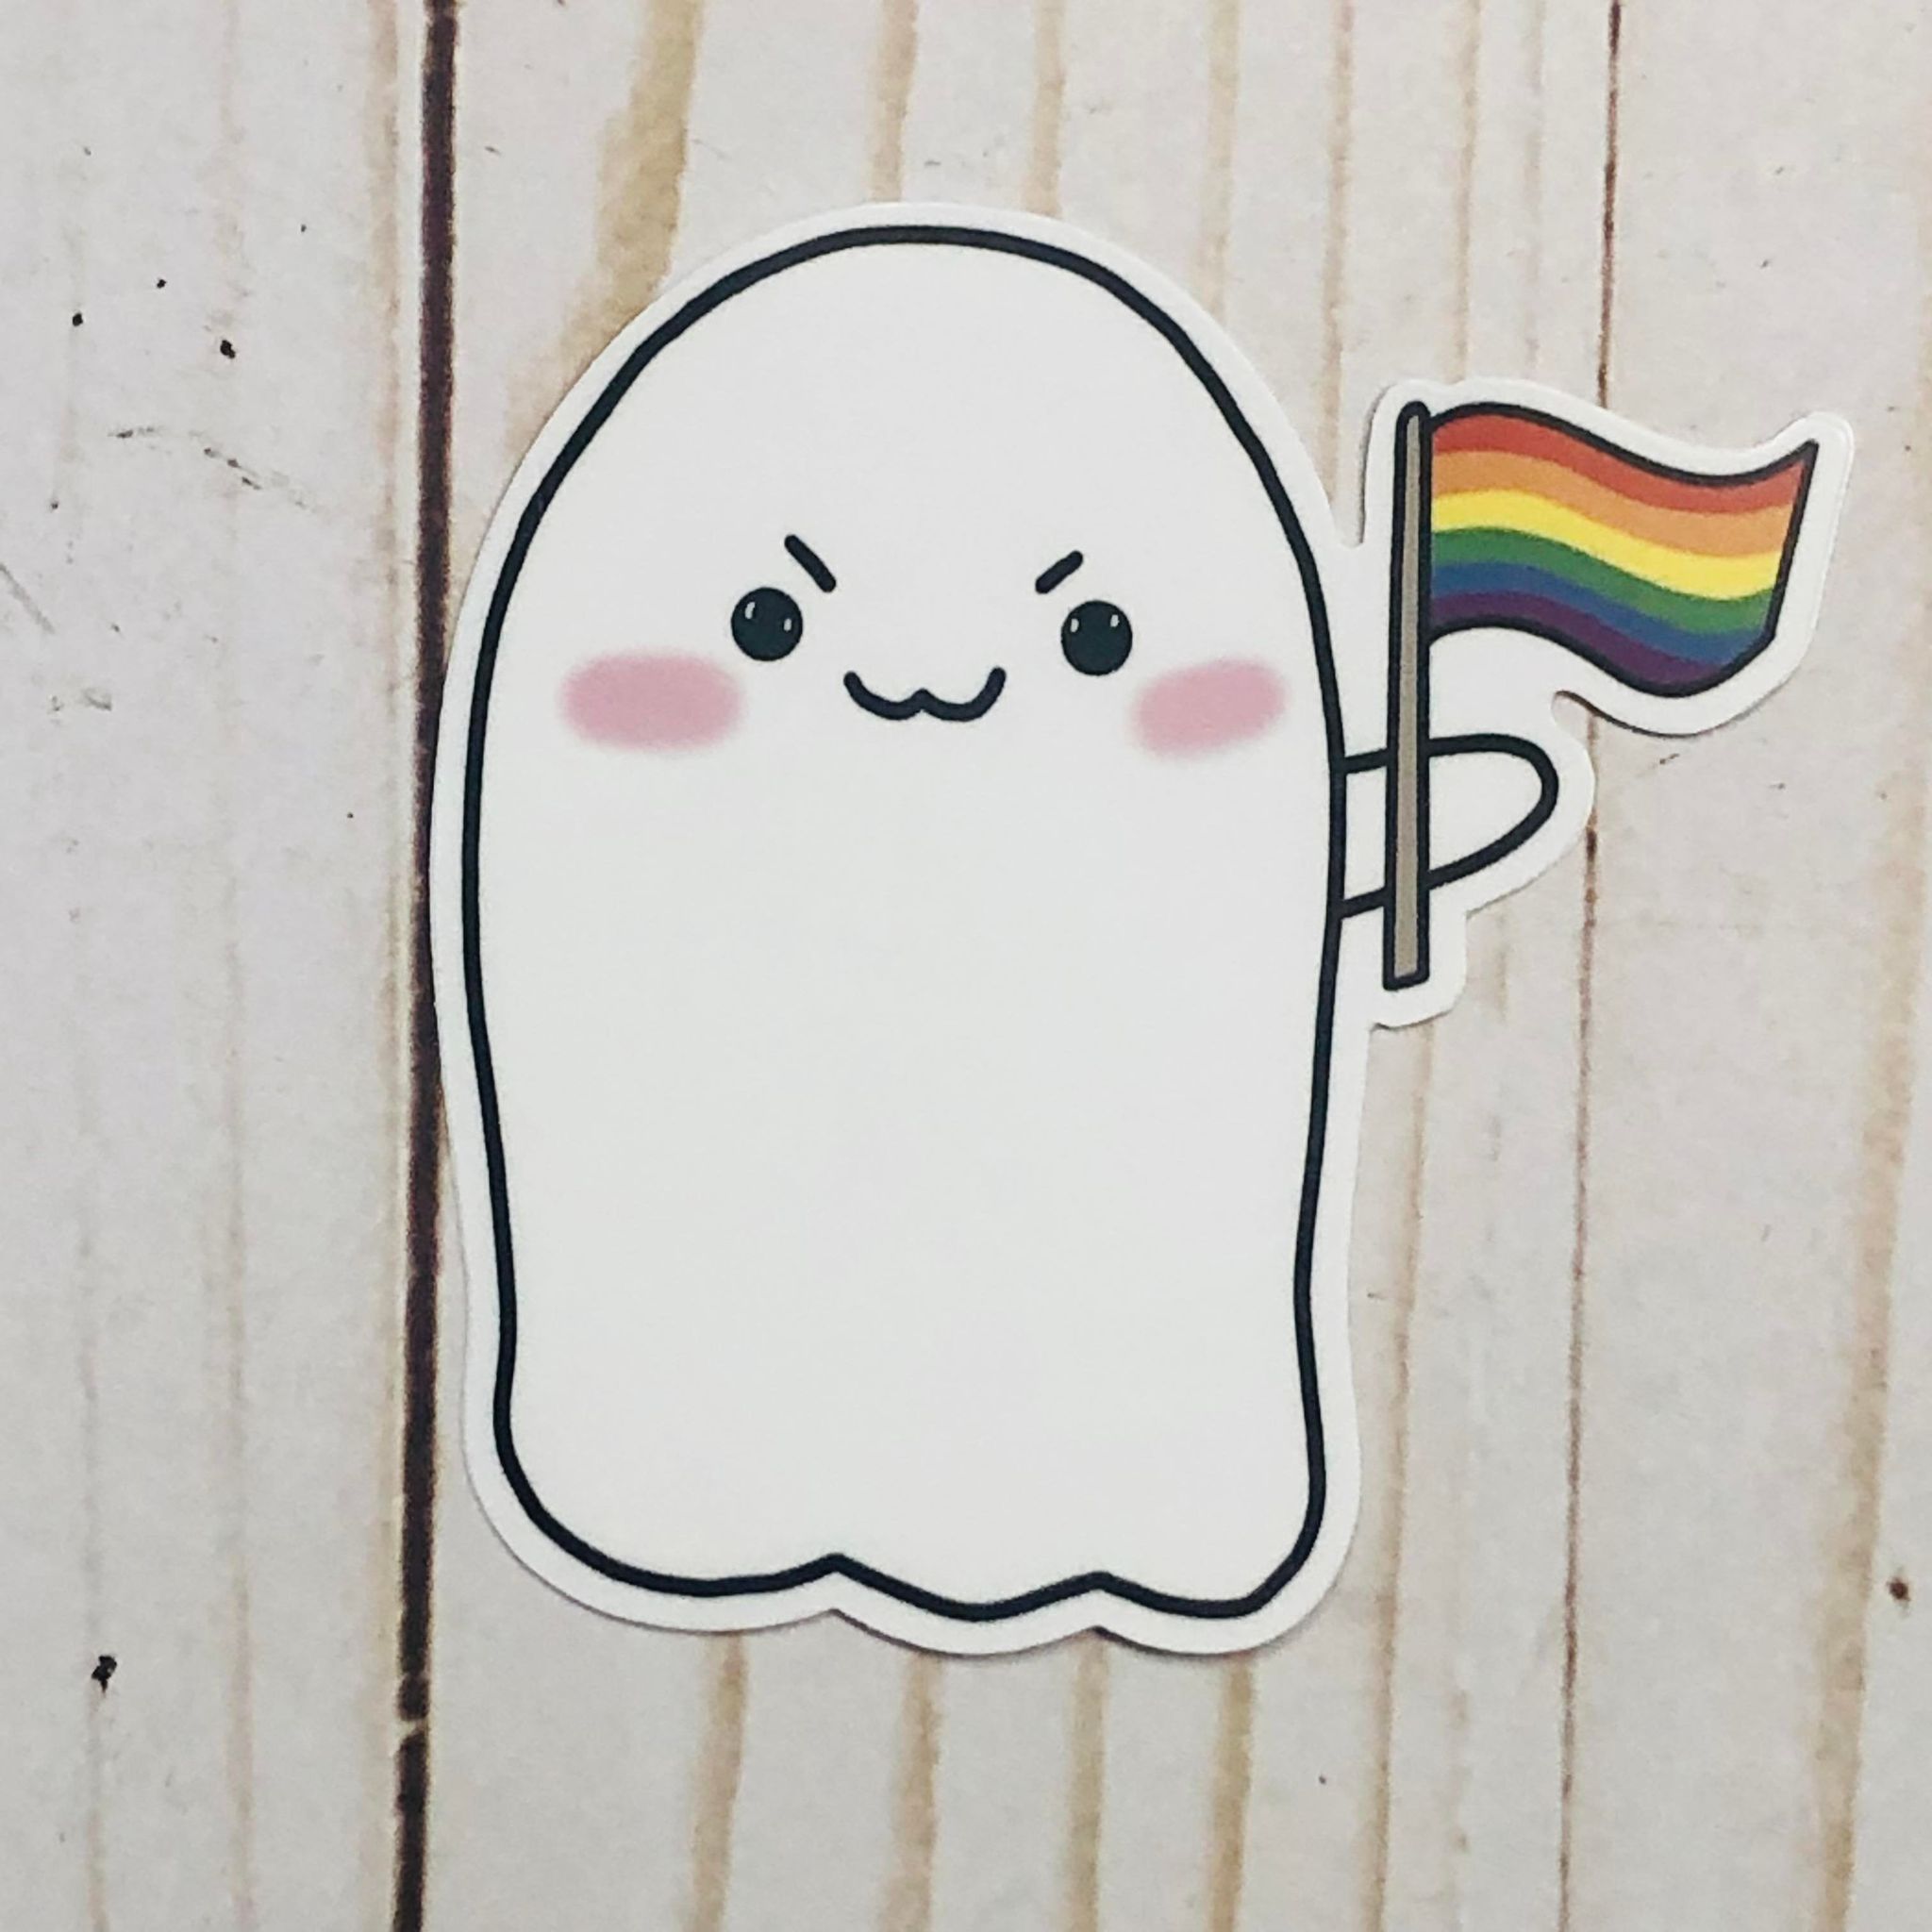 Pride Flag Stabby without Knife Classic Single Vinyl Sticker or Set